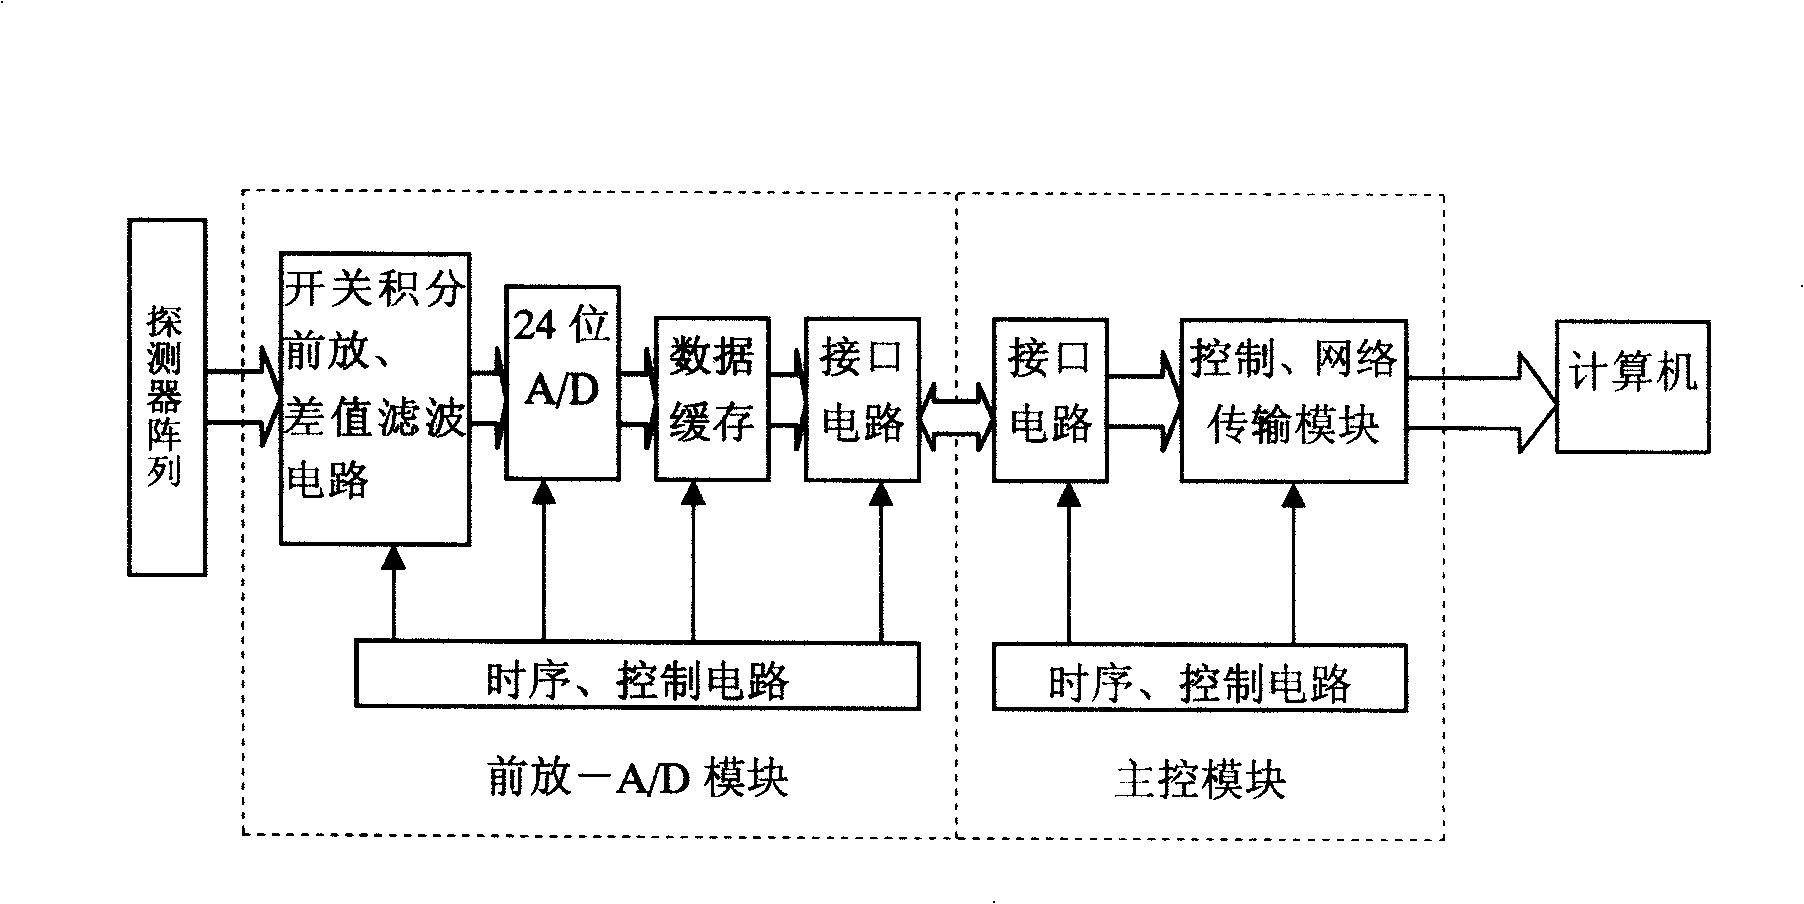 Radiation imaging collection device and radiation imaging data collection method